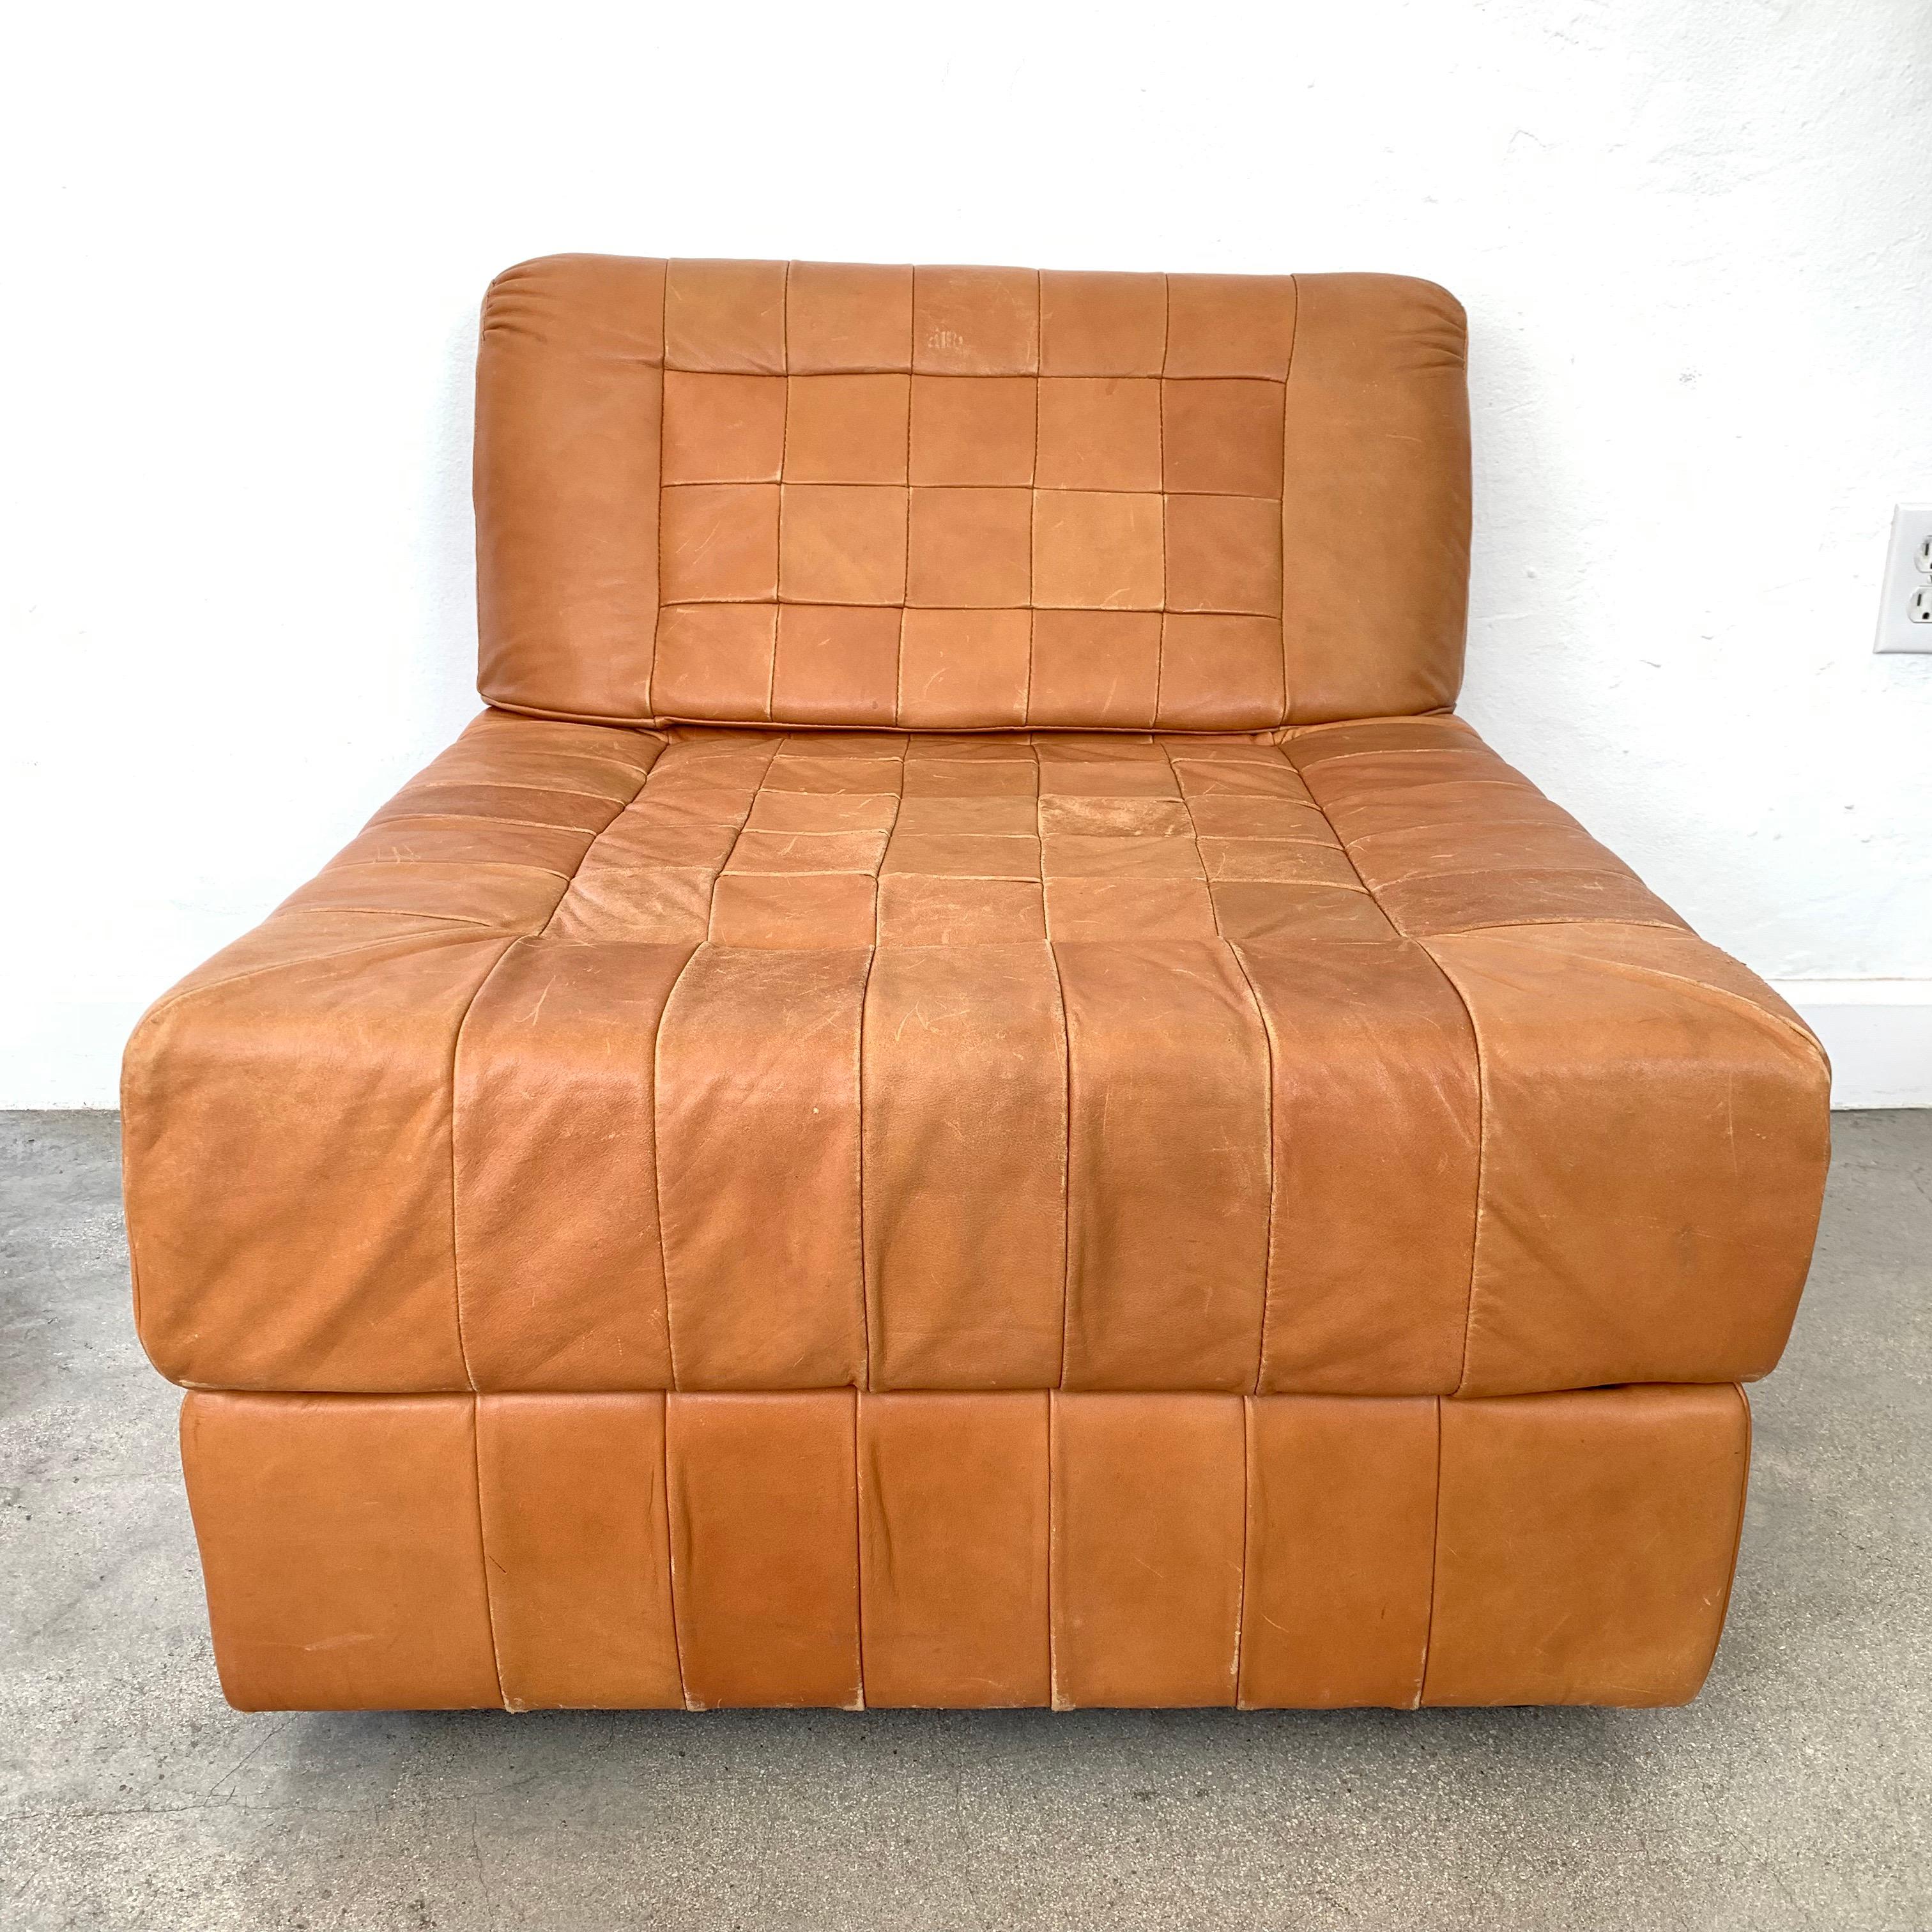 Patchwork leather chair with removable back rest also can be used as an ottoman designed by Percival Lafer, for Brazil Industries.